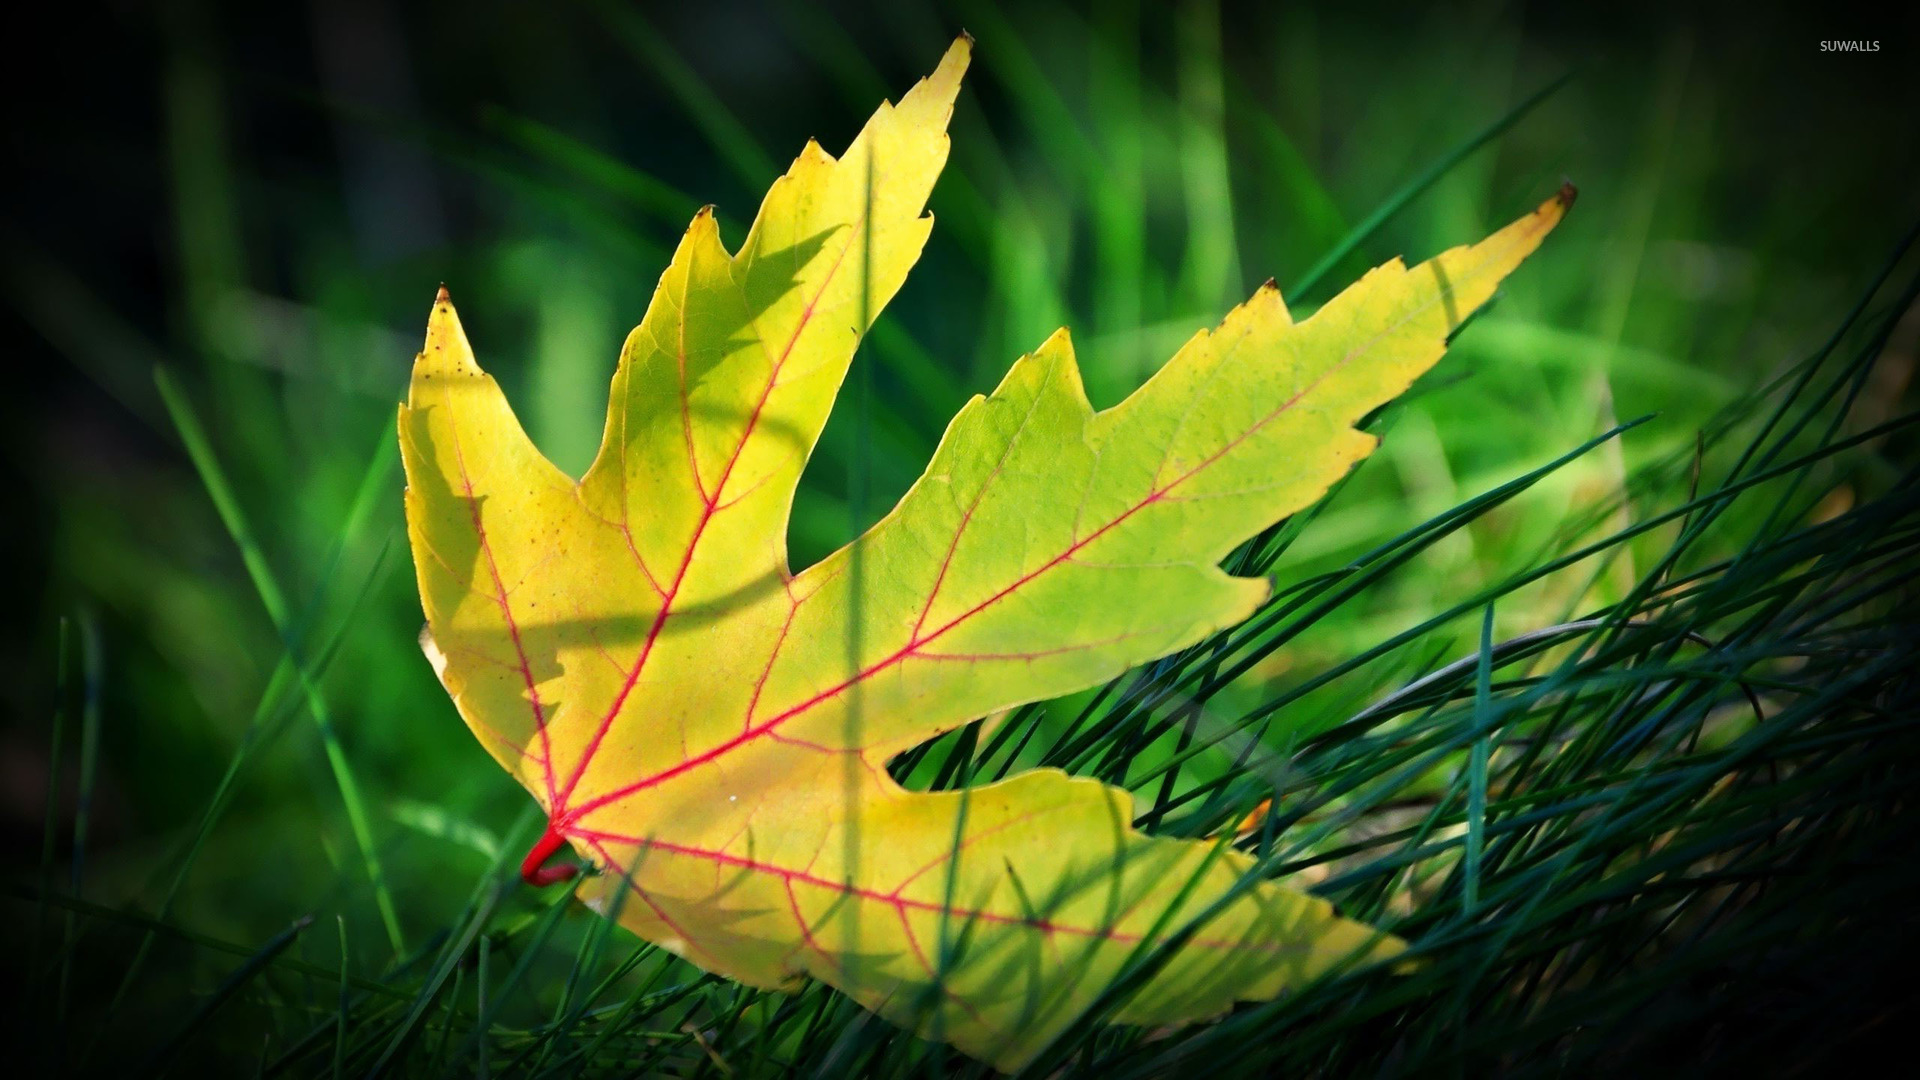 Green leaf in the grass wallpaper - Photography wallpapers - #18758